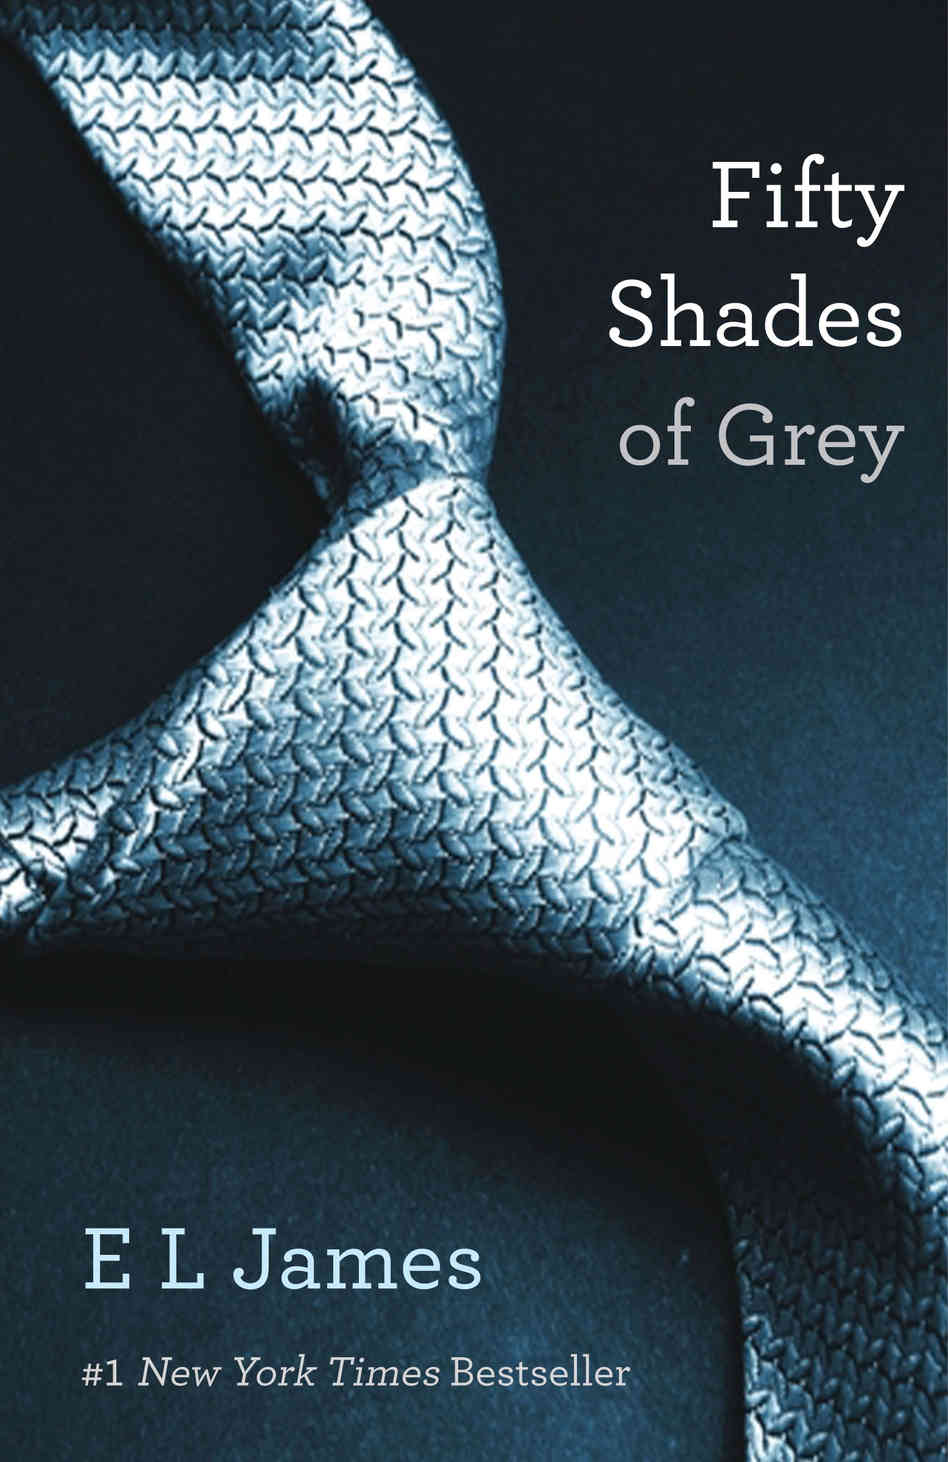 Five reasons I’ll never read ‘Fifty Shades of Grey ...